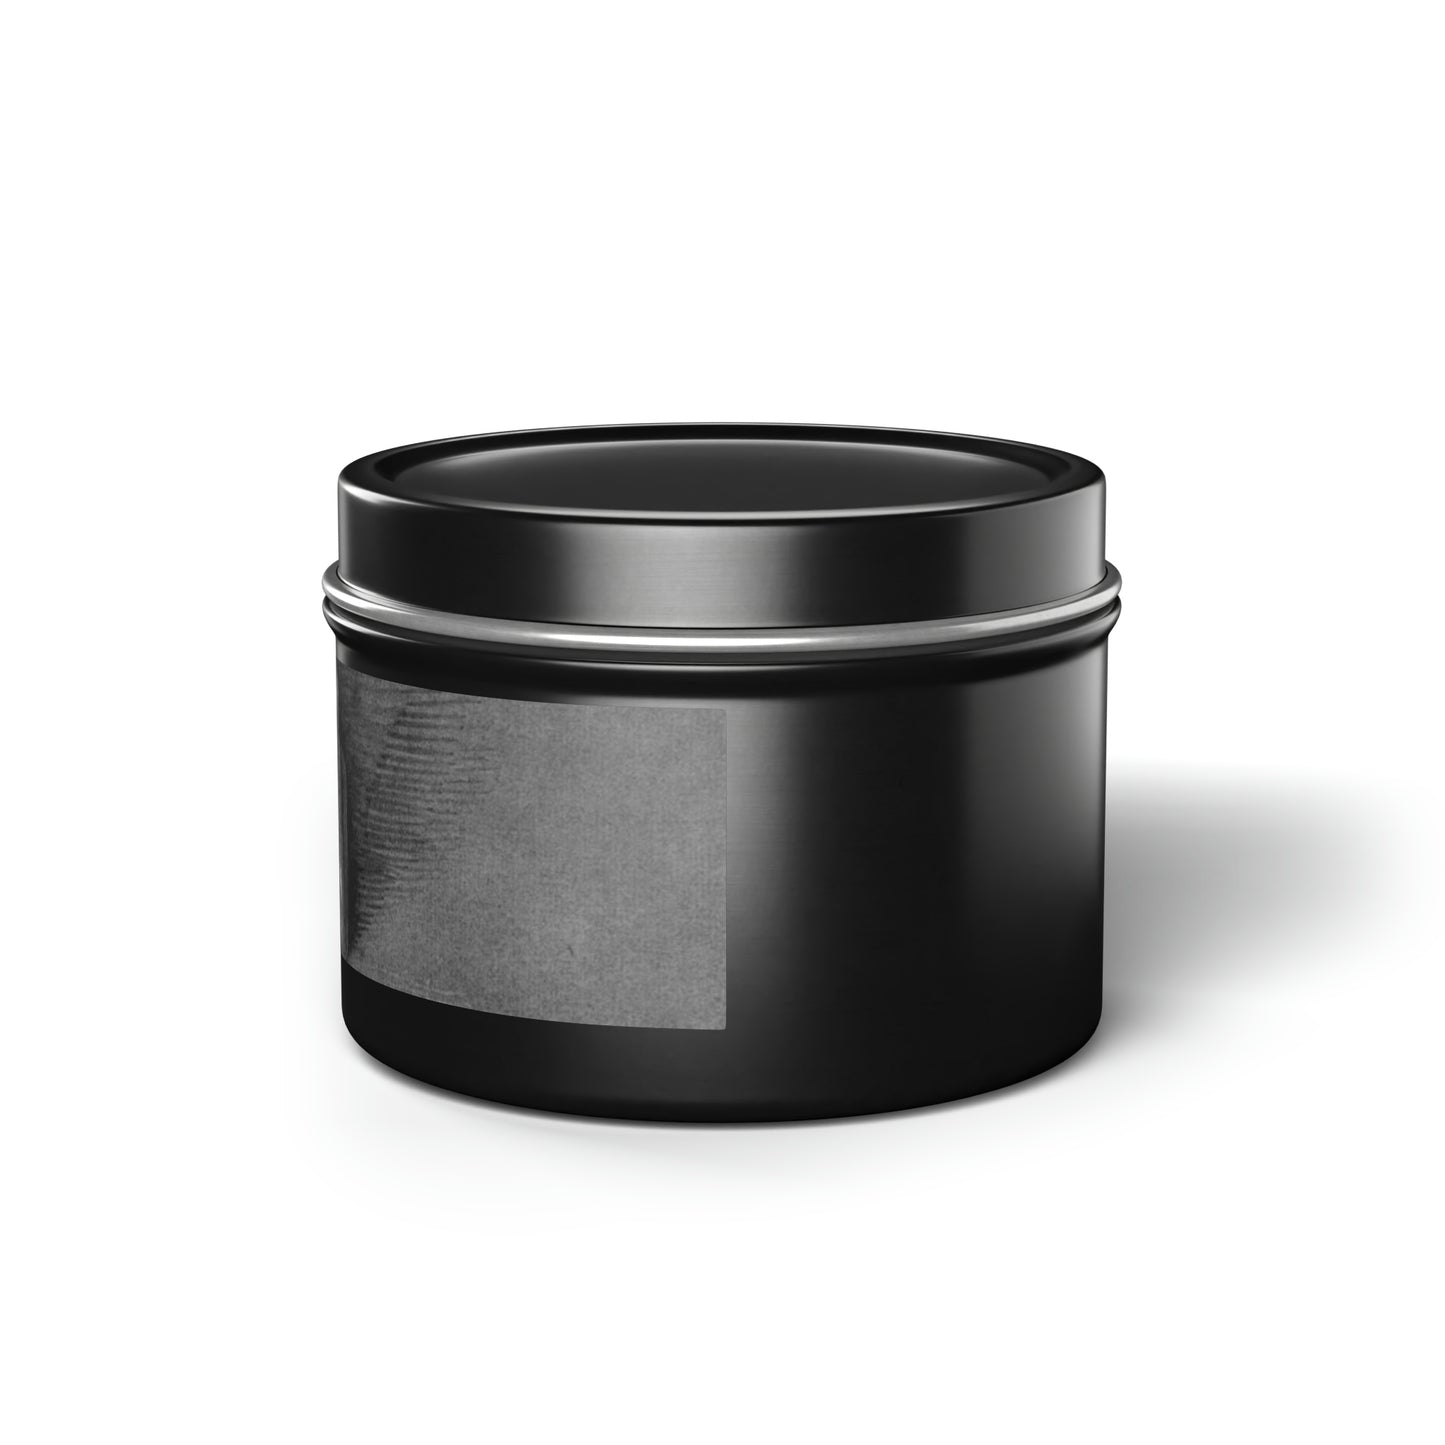 a black container with a black lid on a white background